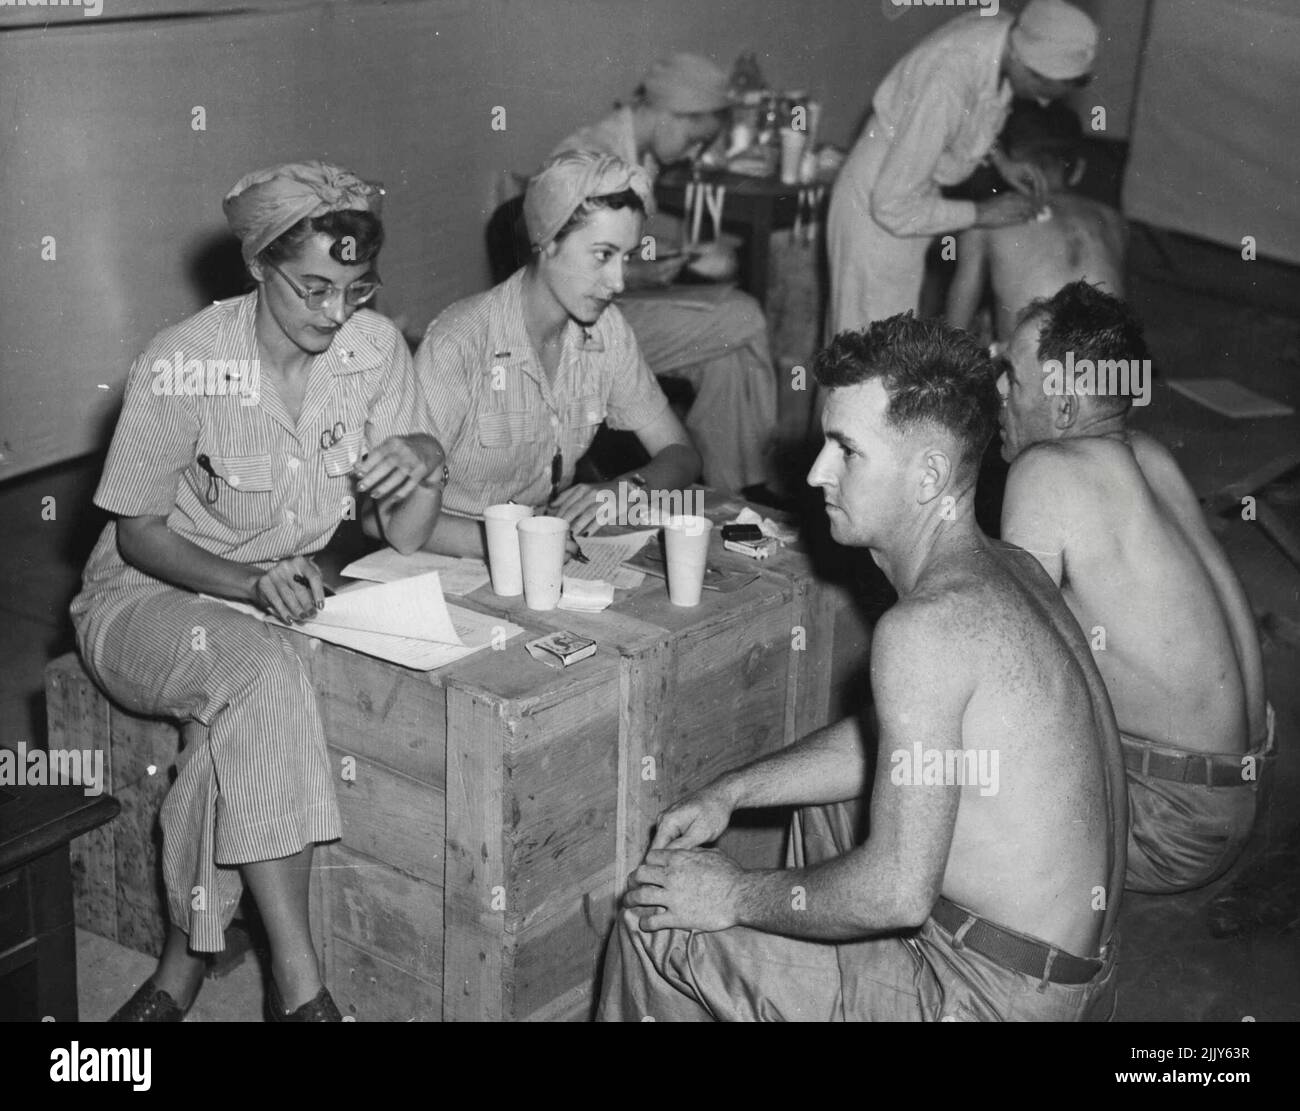 Released Eighth Division Prisoners-of-War receive comforts at a depot while awaiting medical attention from U.S. Army nurses in Yokohama. September 4, 1945. (Photo by Australian Official Photo). Stock Photo